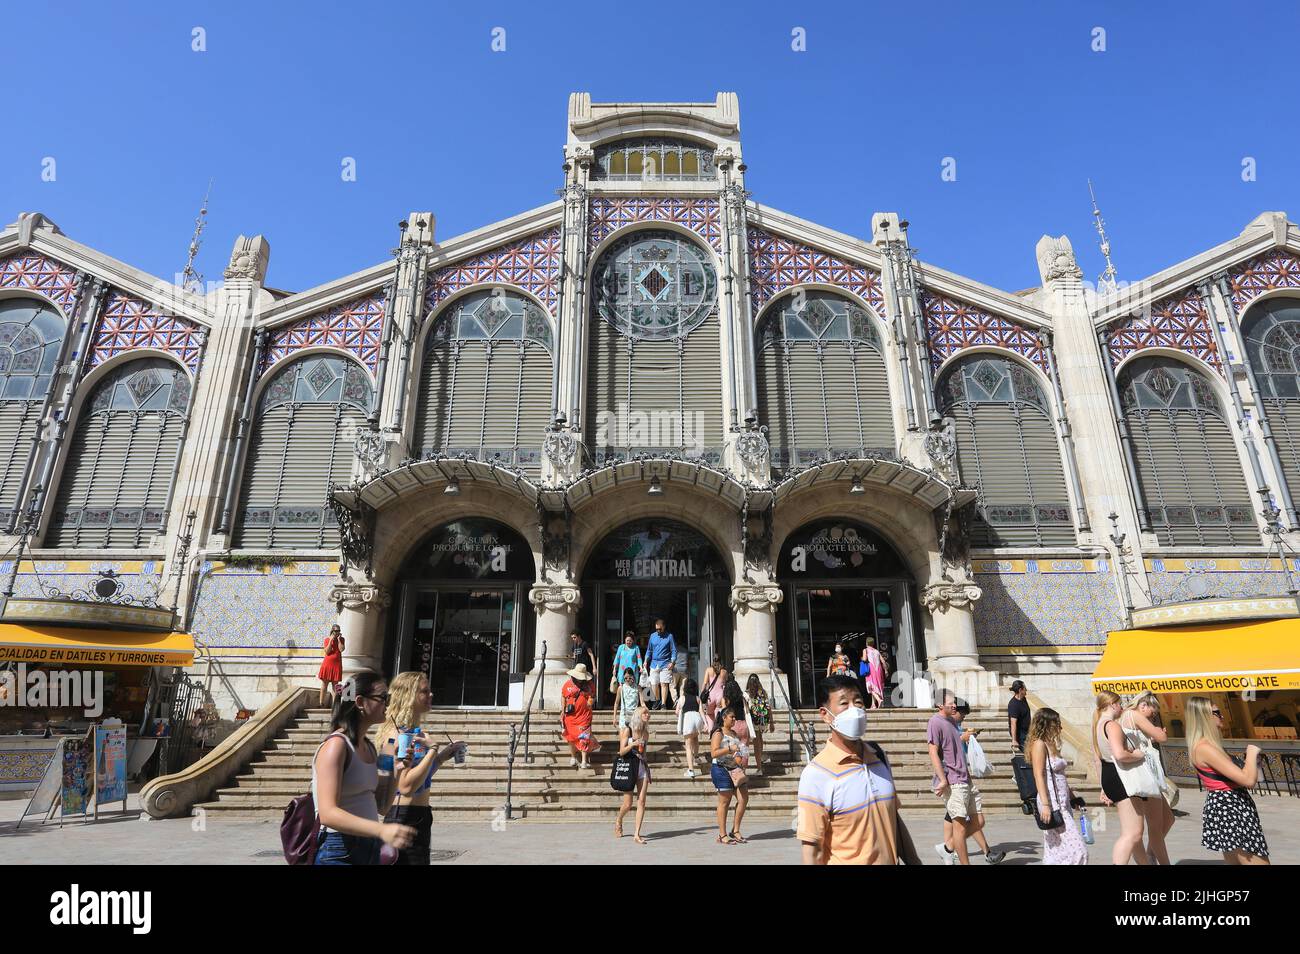 Exterior of the Central Market or Mercado Central, the largest indoor market in Europe, in Valencia, Spain Stock Photo